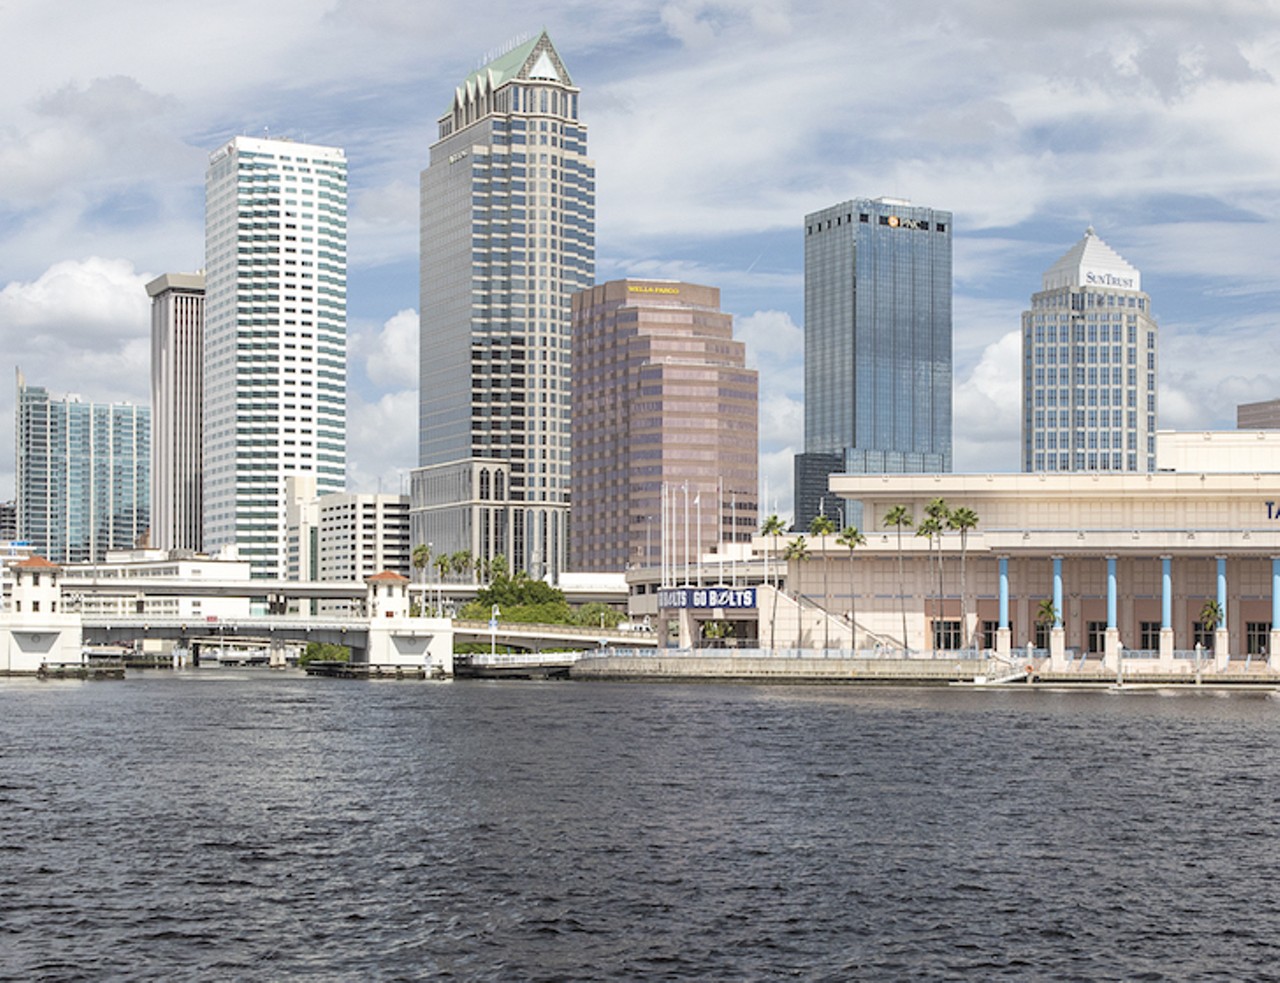 NOW
Downtown Tampa skyline and Platt Street Bridge
View from Davis Islands, 2020
Current plans call for the extension of the Riverwalk to the west side of the river to continue it northward, connecting neighborhoods on both sides to downtown. The most remarkable change in these two photos that span 60 years, is the difference in the skyline. In the Burgert photo, the First National Bank (center left) with the flag on top was 13 stories high and looks to be the tallest building in downtown. It pales in comparison to the modern skyscrapers. Built in 1990, 100 Tampa North, in the same position in the new photo, is 42 stories high.